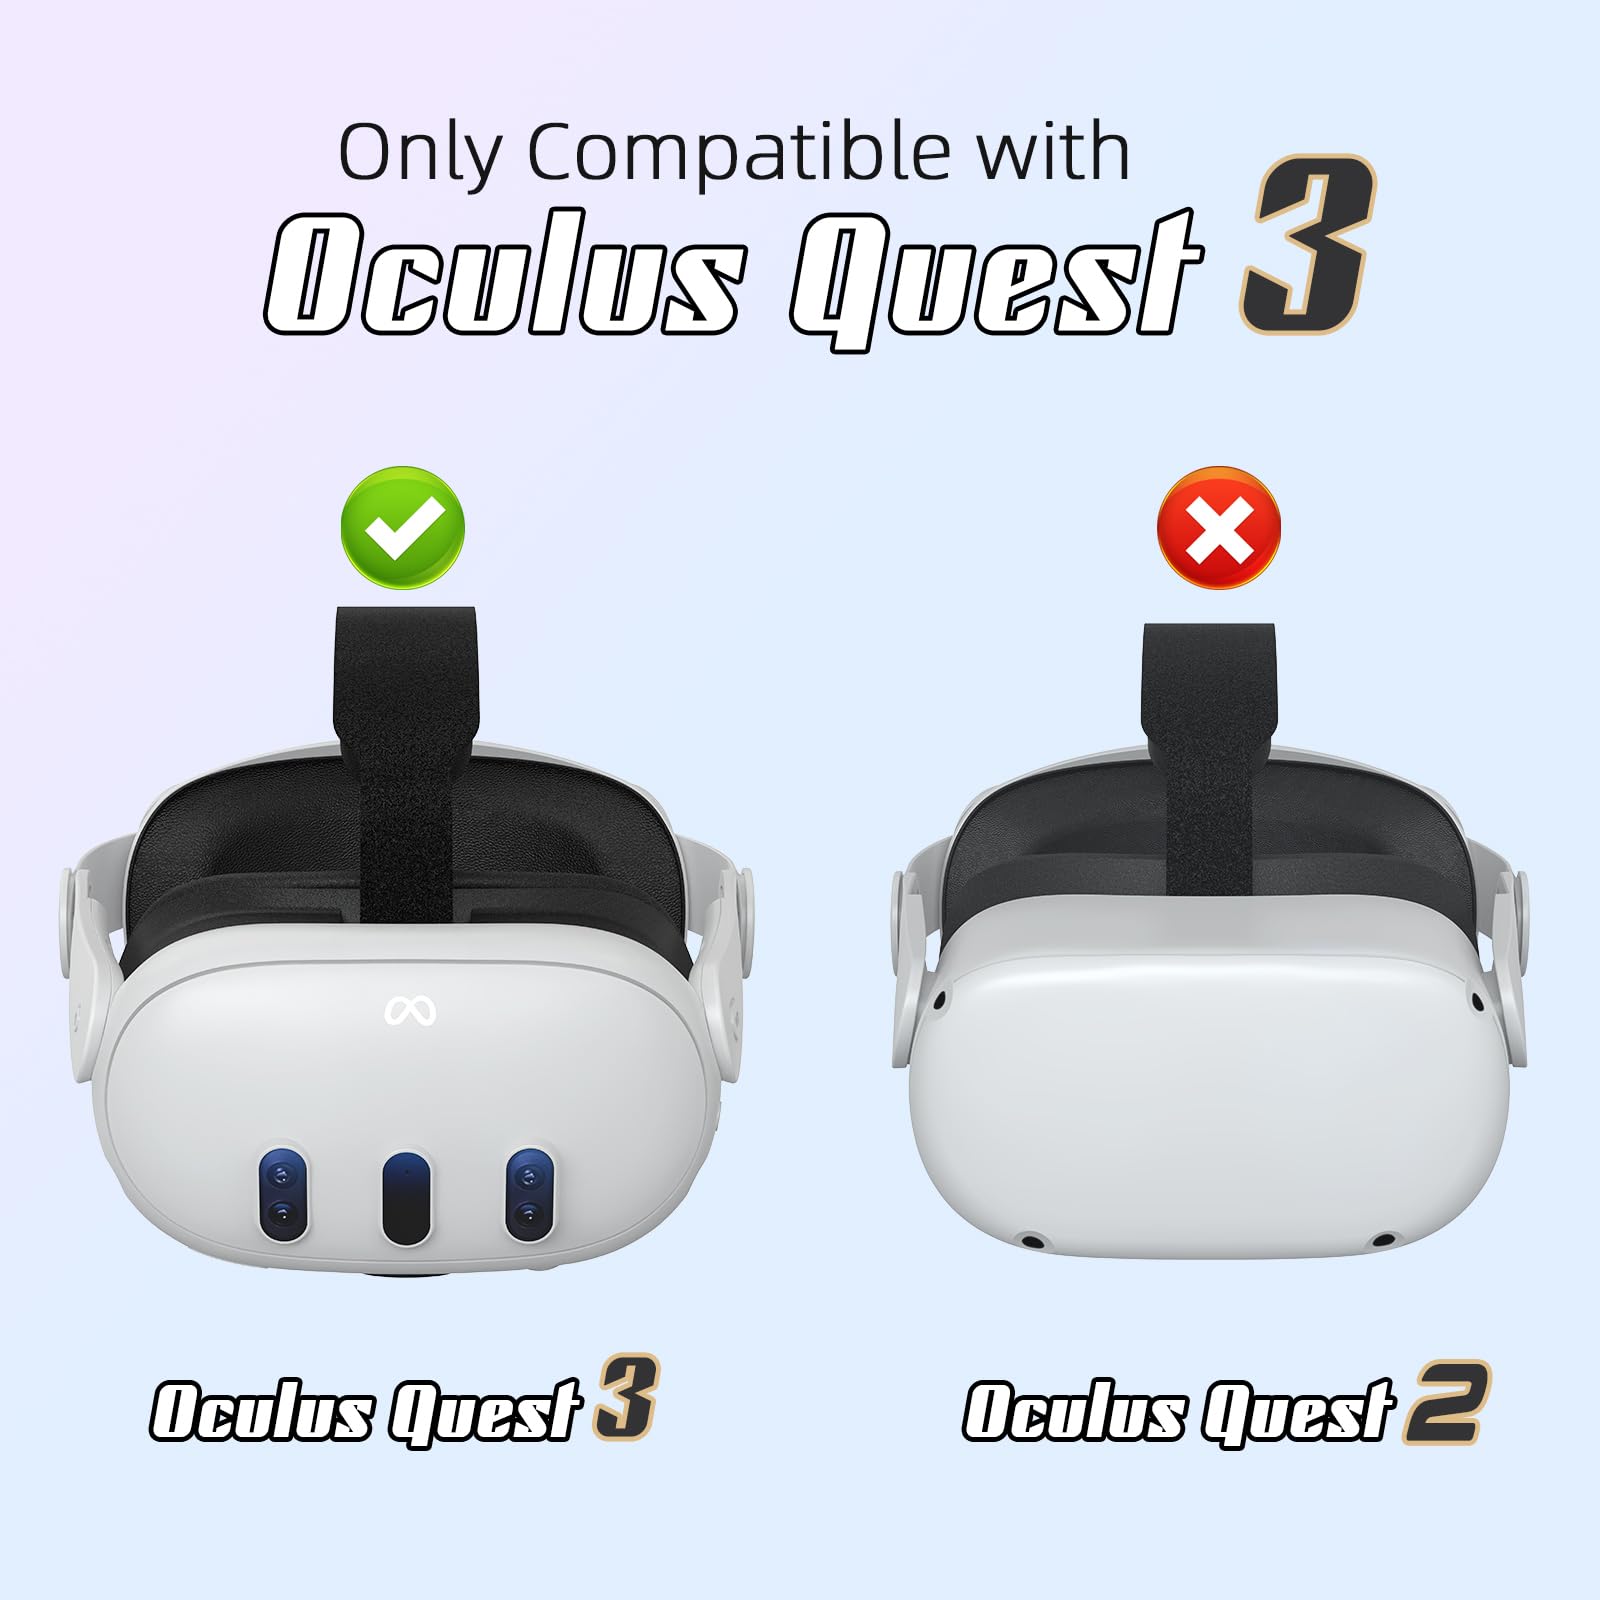 Head Strap Compatible with Oculus Quest 3,Meta Quest 3 Accessories Adjustable Elite Strap Replacement for Enhanced Comfort Support and Gaming Immersion in VR